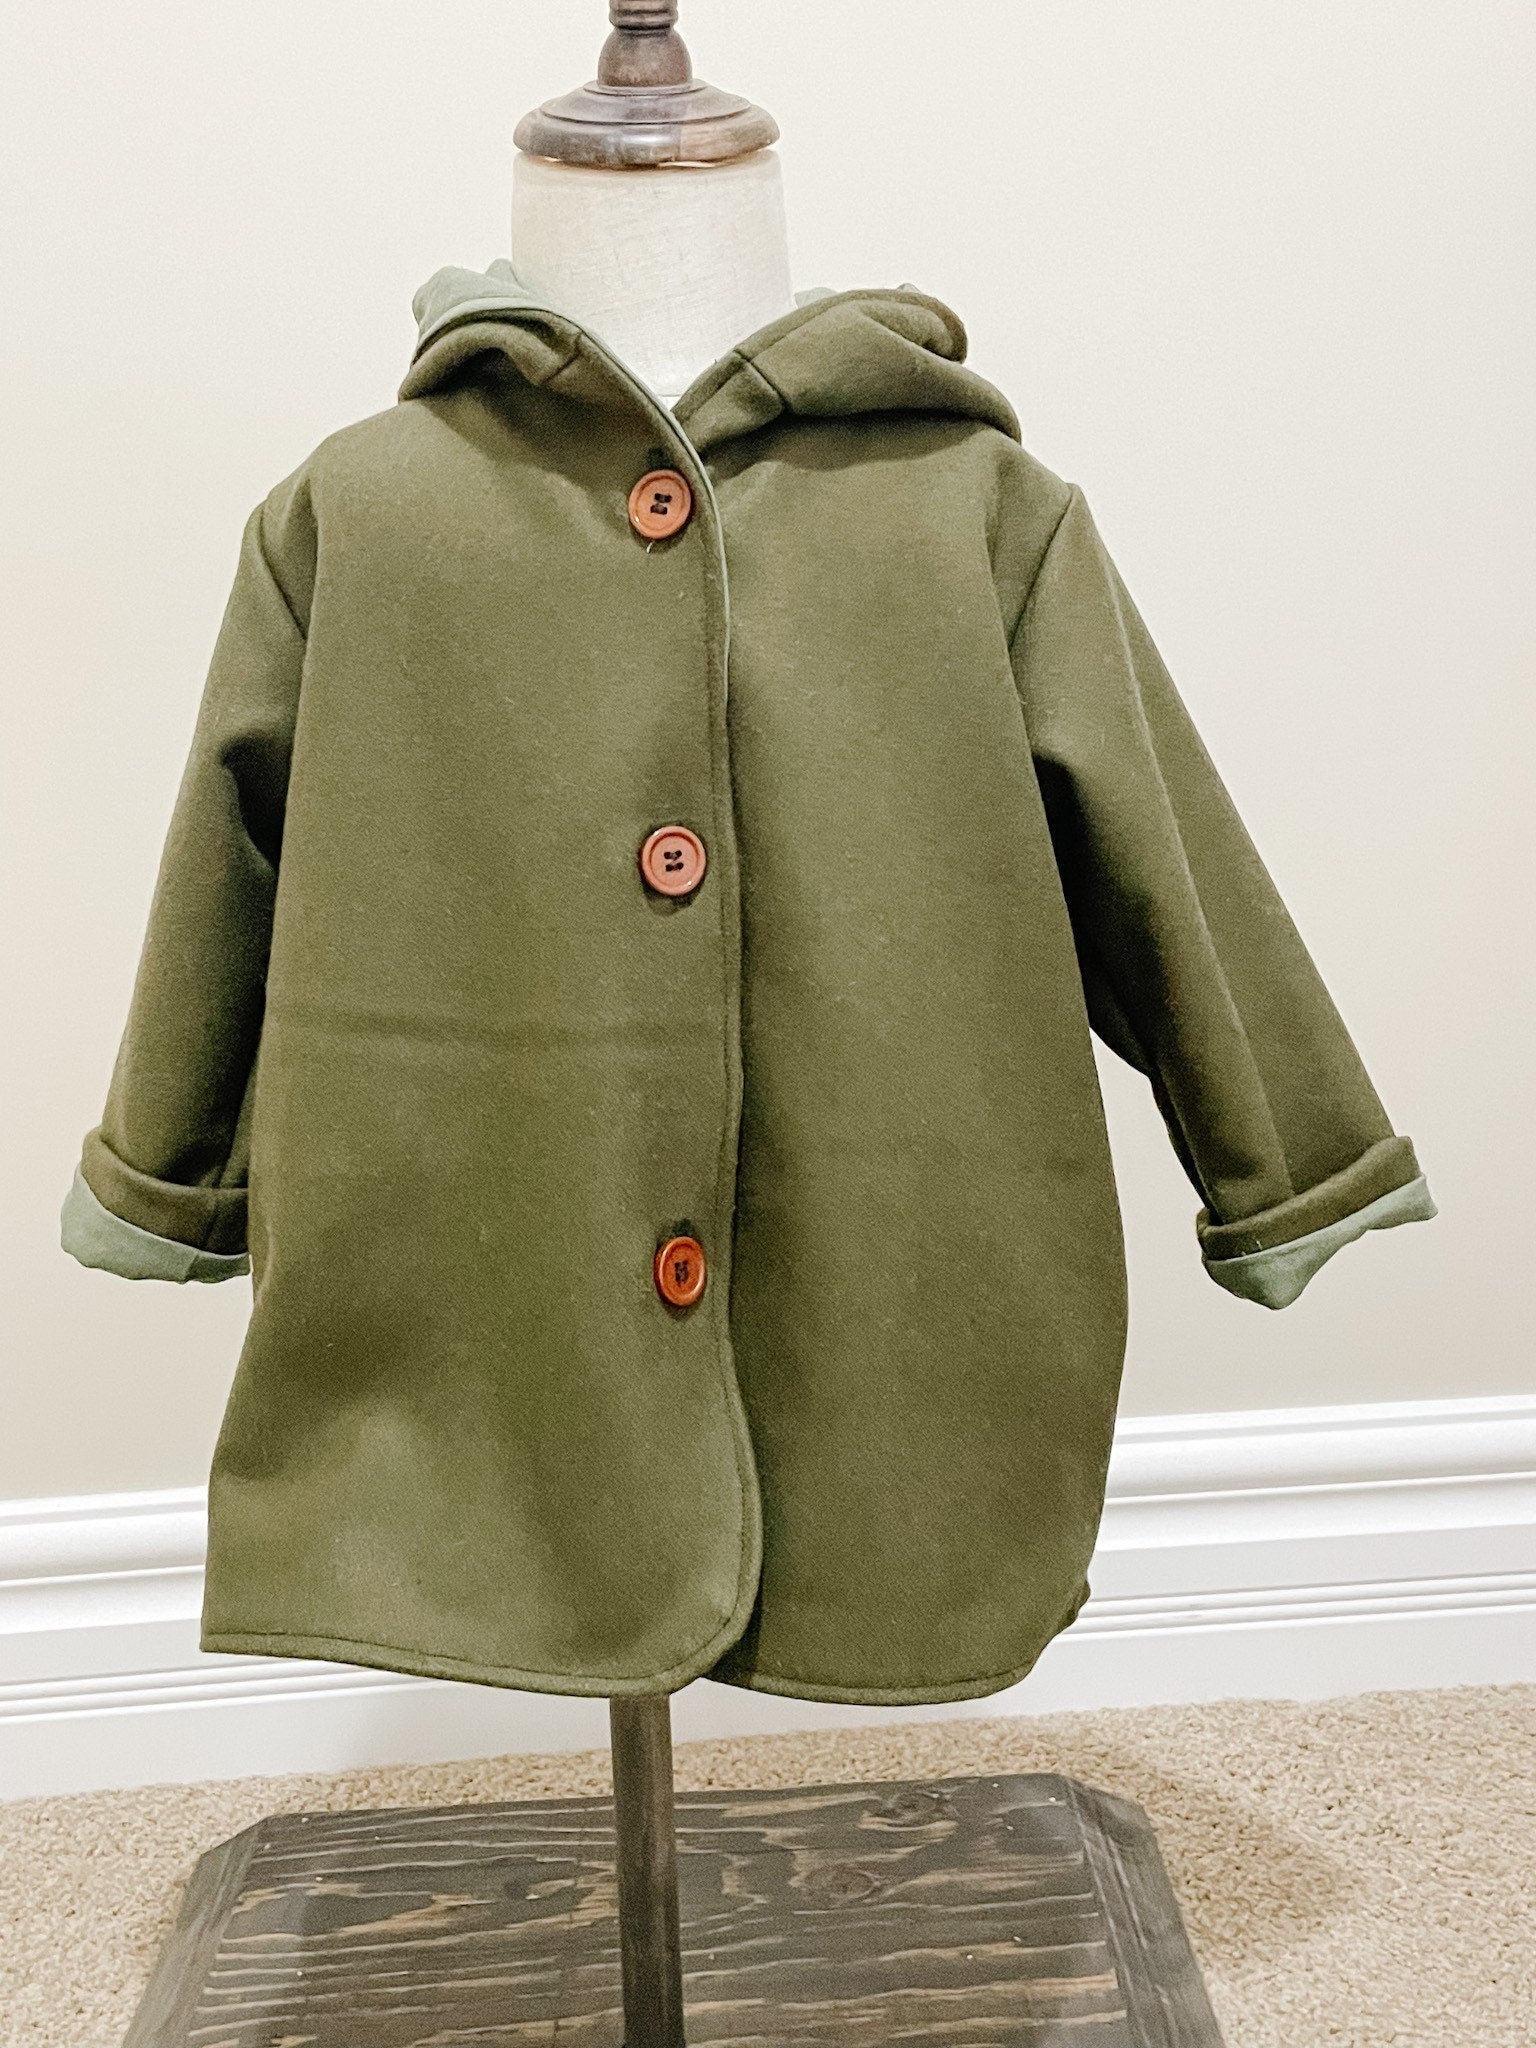 Hunter Green Kid's Coat with Hoodie for Girls or Boys